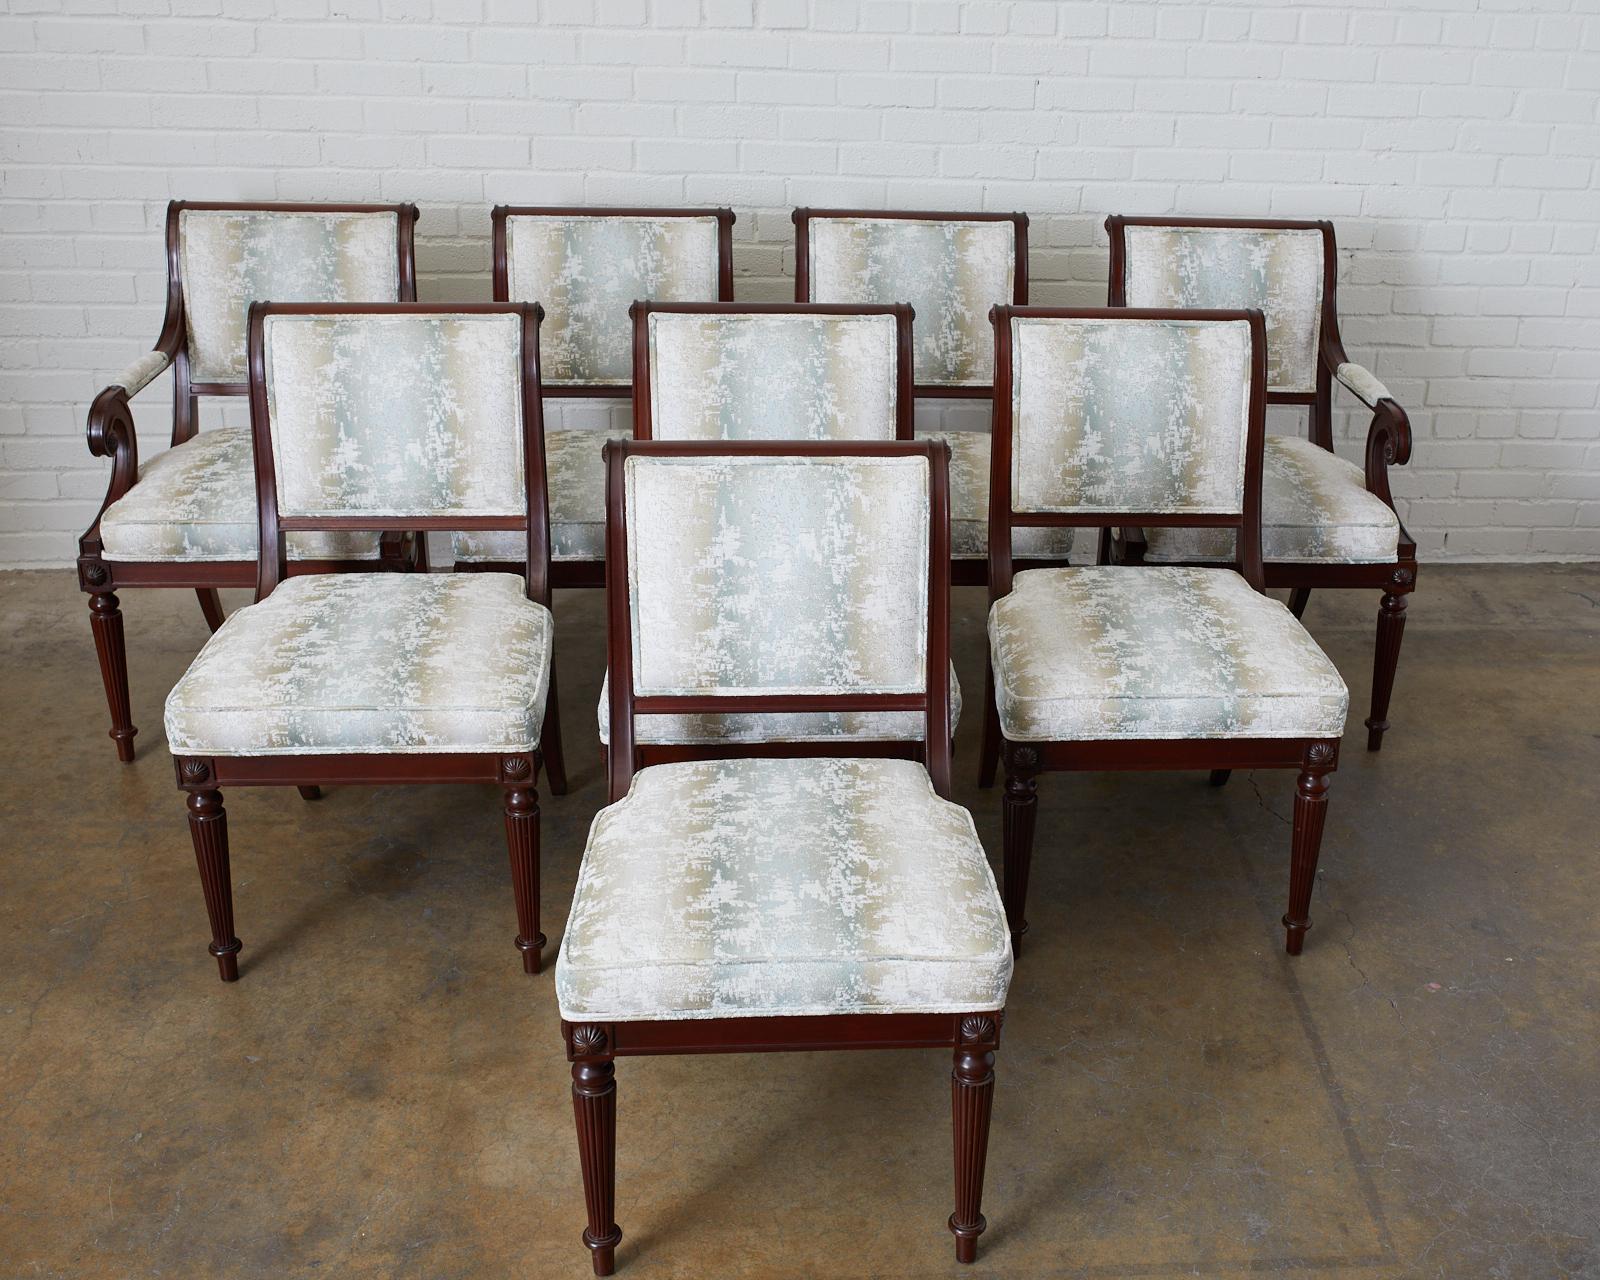 Hand-Crafted Set of Eight English Regency Style Mahogany Dining Chairs